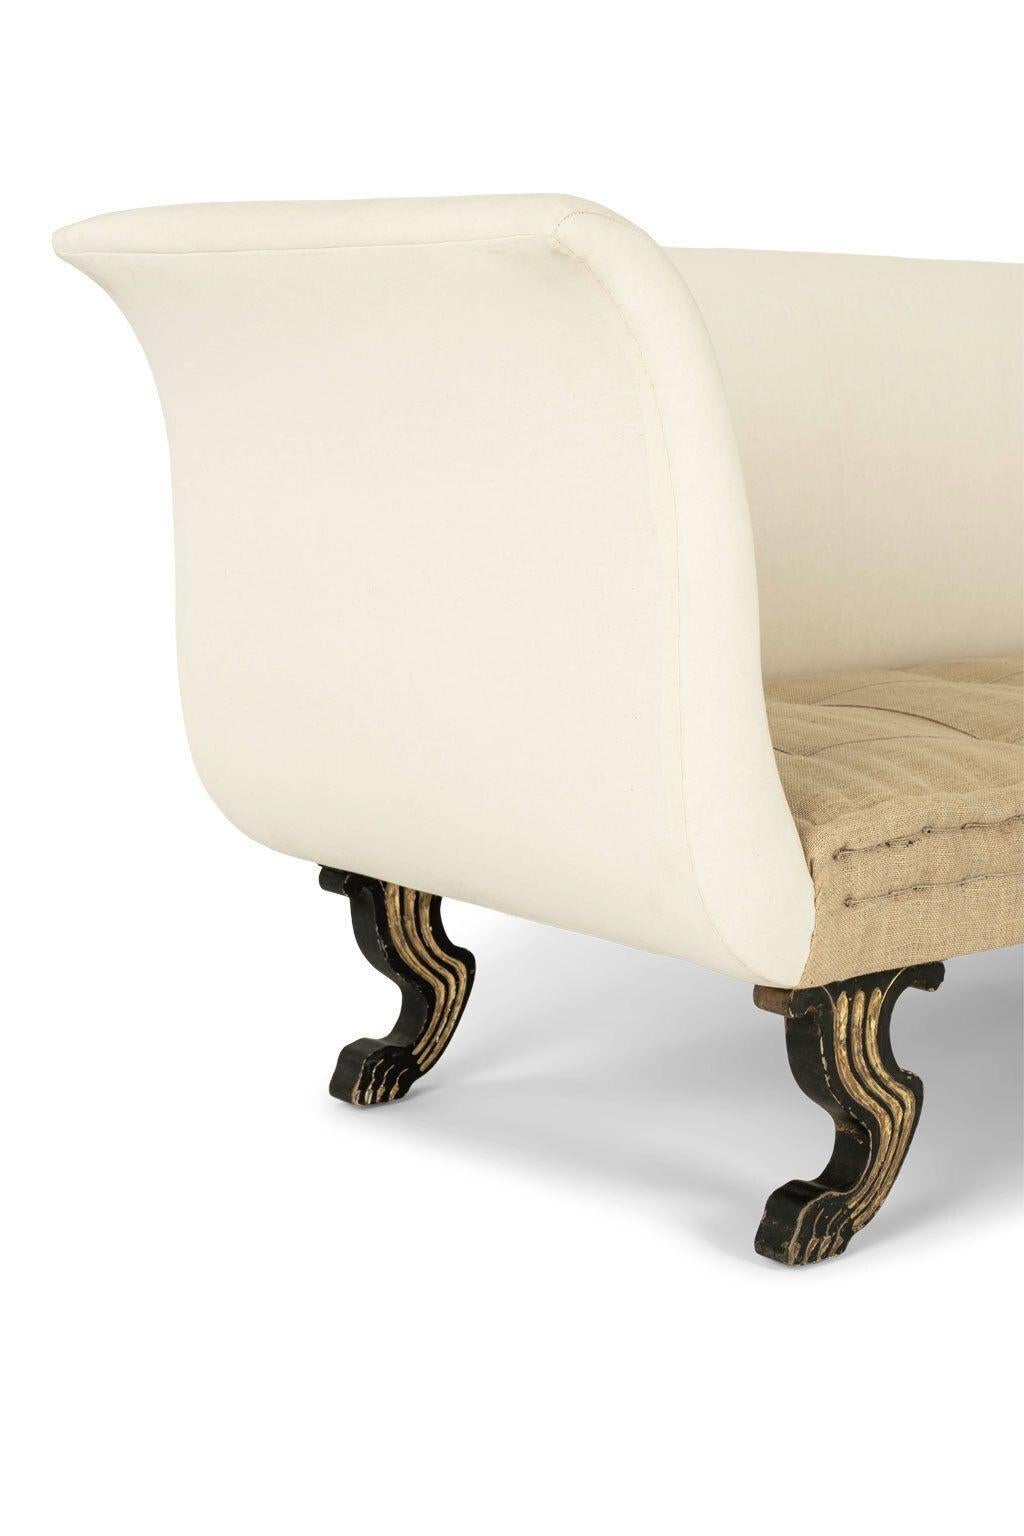 Empire style curved-arm daybed, or sofa, raised upon ebonized silhouette paw feet with gilt decoration. Newly upholstered in off-white muslin and washed burlap. Large proportions with deep seat.